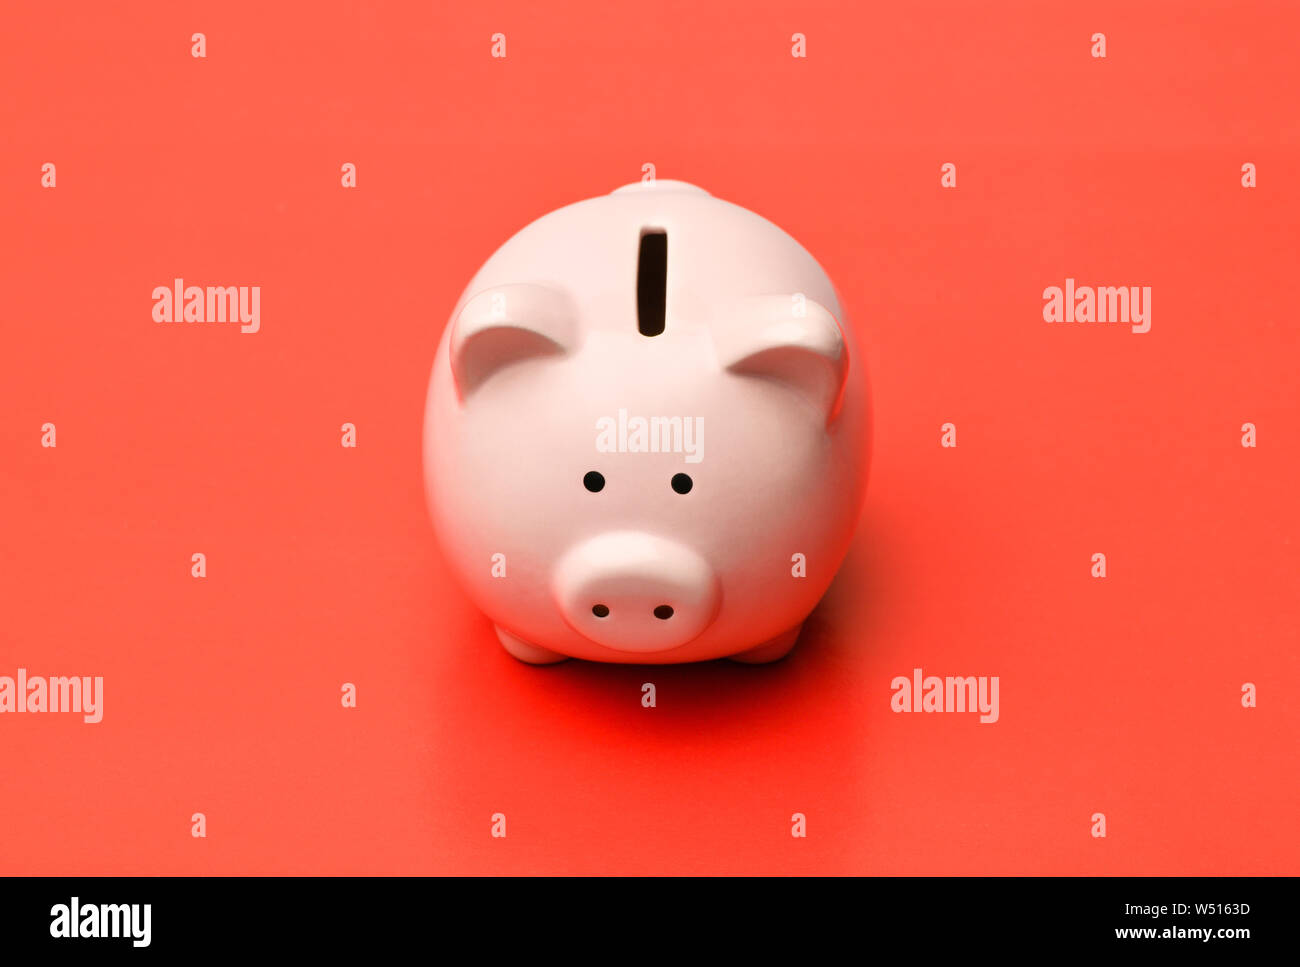 Pink piggy Bank stands in the center on a red background with a shadow. Horizontal photography Stock Photo